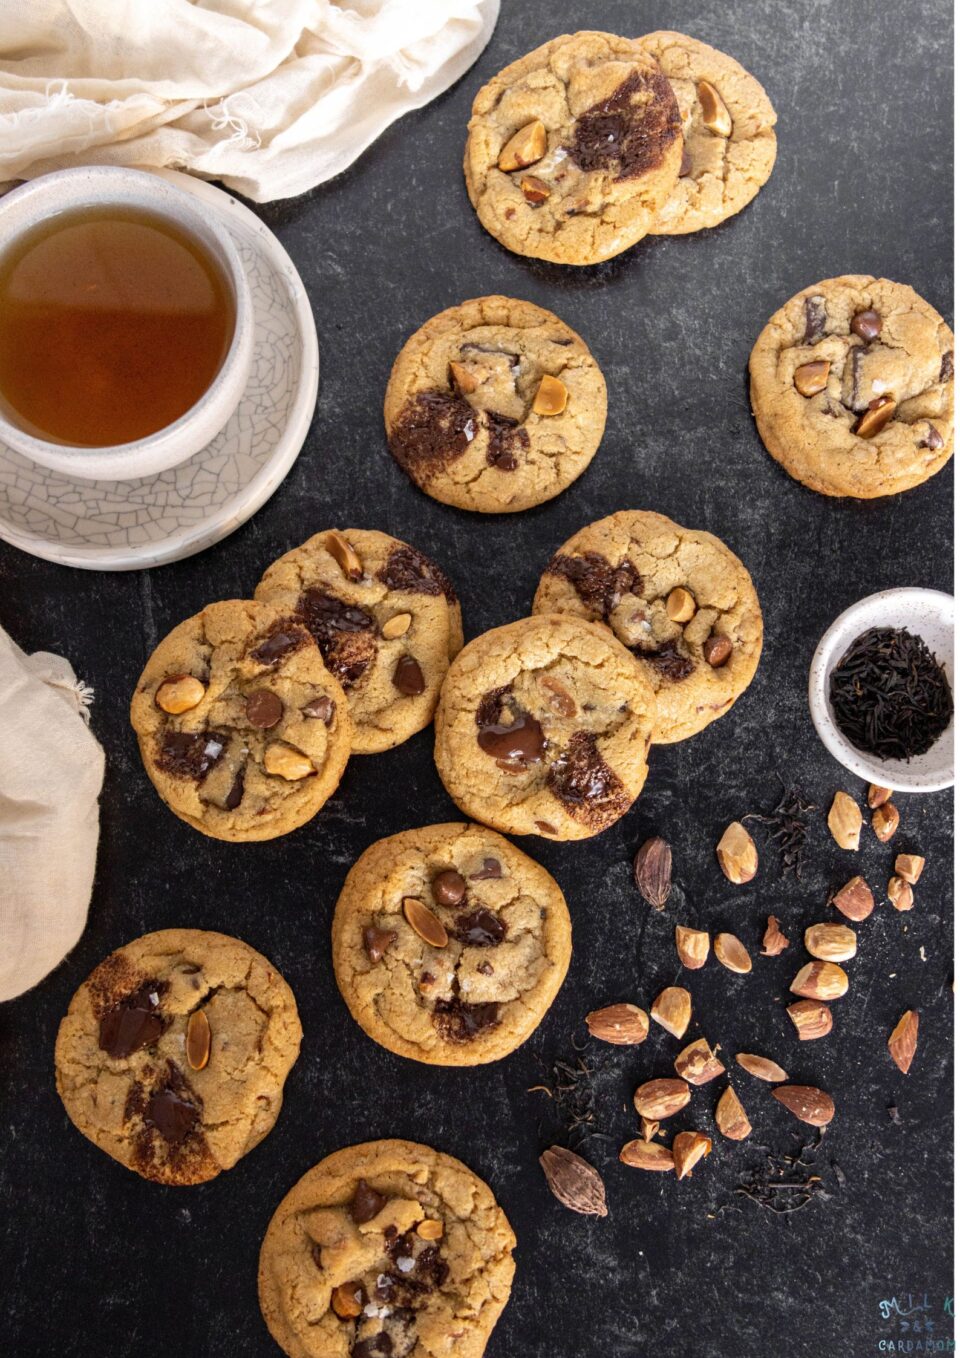 Black Cardamom and Toasted Almond Chocolate Chip Cookies